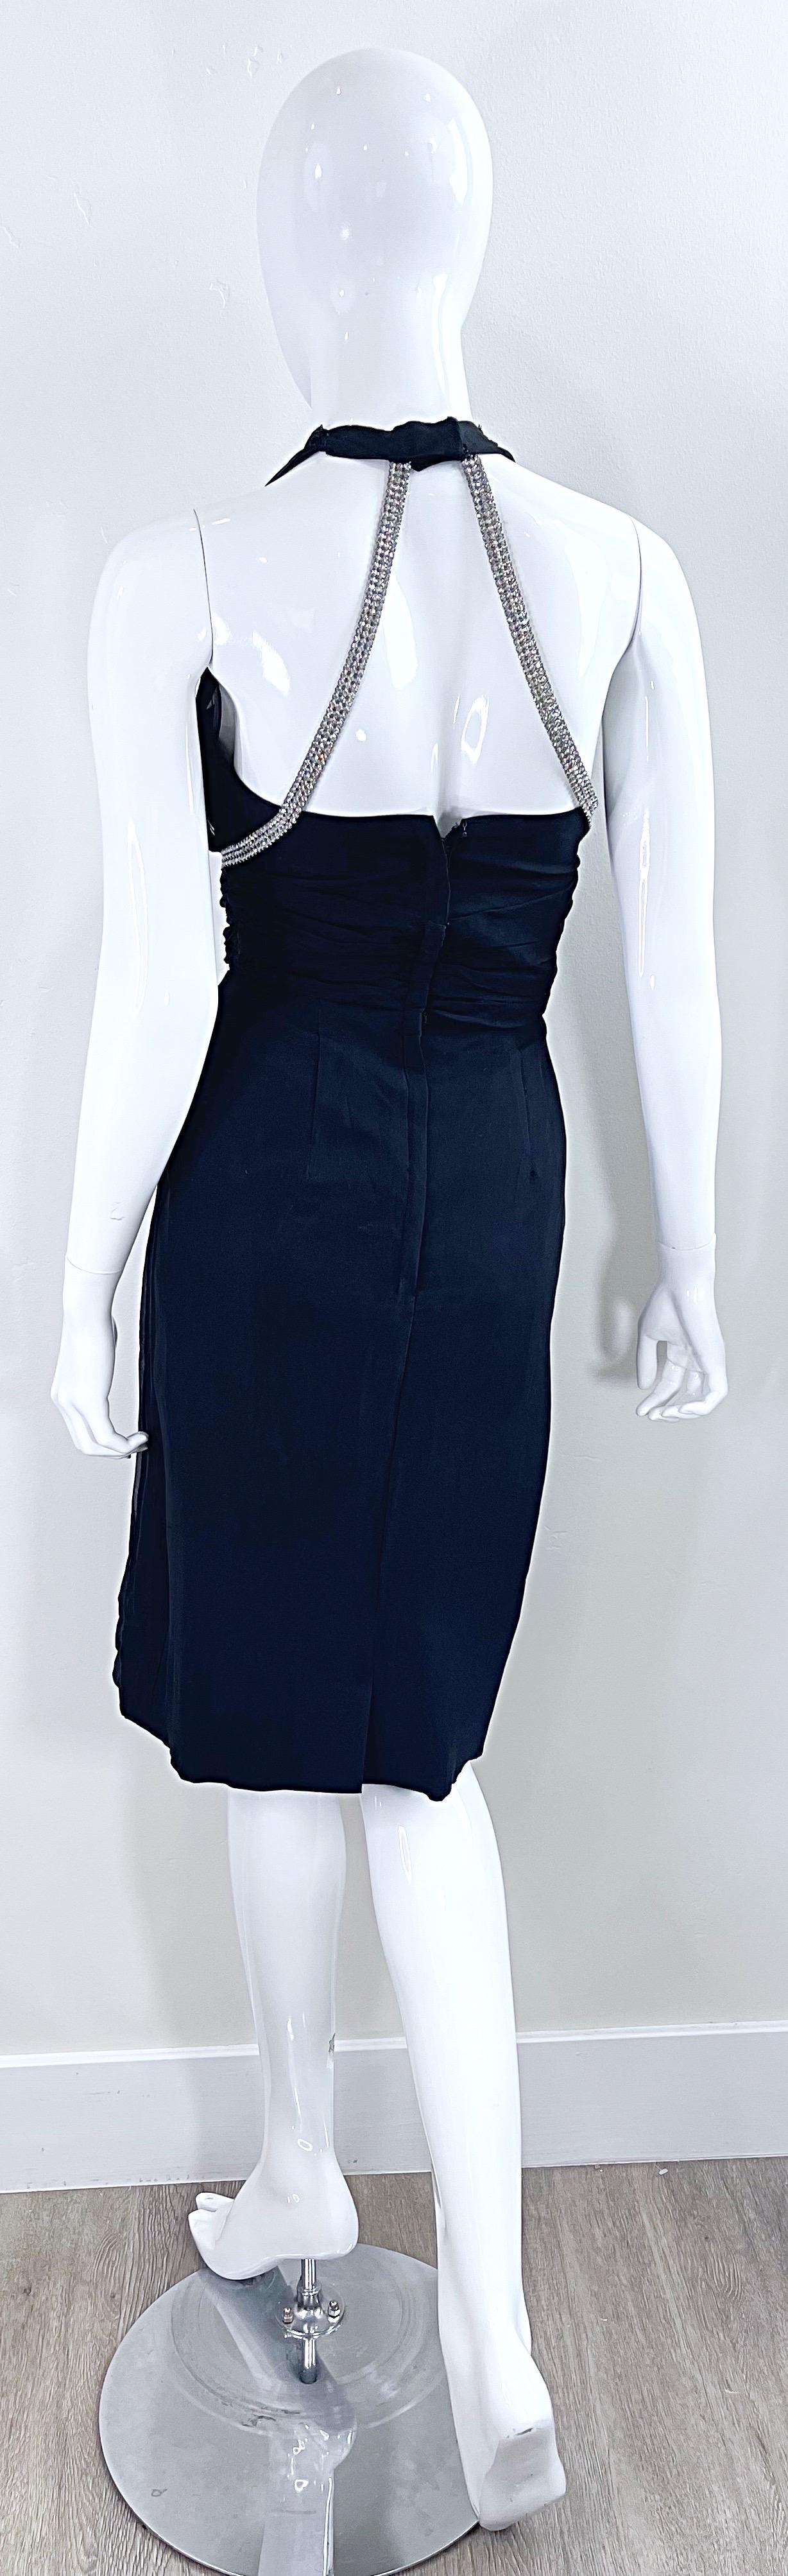 1950s Demi Couture House of Nine Black Silk Chiffon Vintage 50s Rhinestone Dress In Excellent Condition For Sale In San Diego, CA